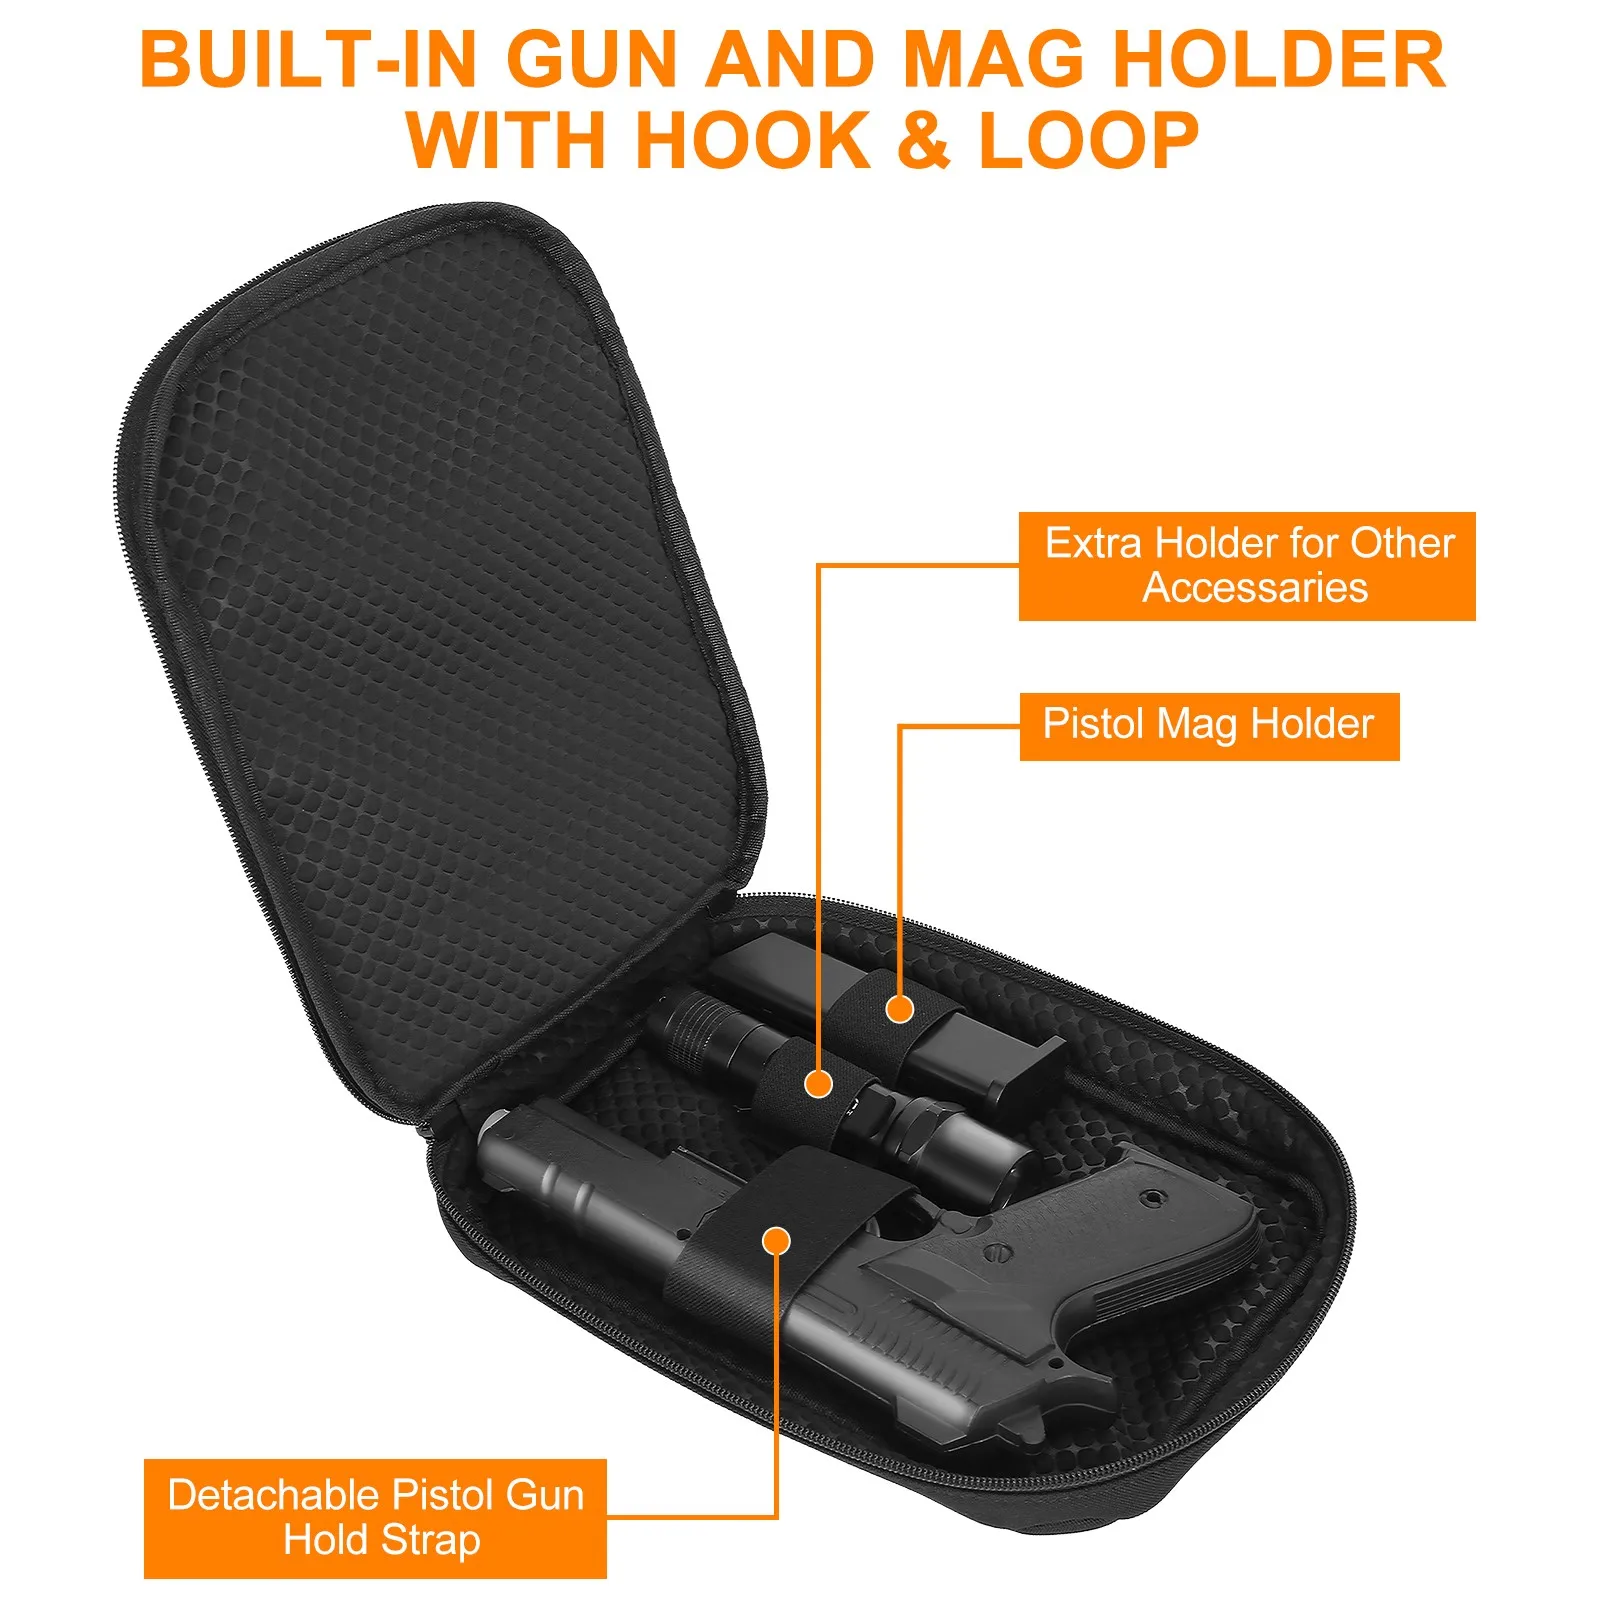 Concealed Carry Airsoft Pistol Holster Magazine Holder Waist Bag Tactical Gun Case Hunting Fanny Pack Glock 17 Belt Pouch